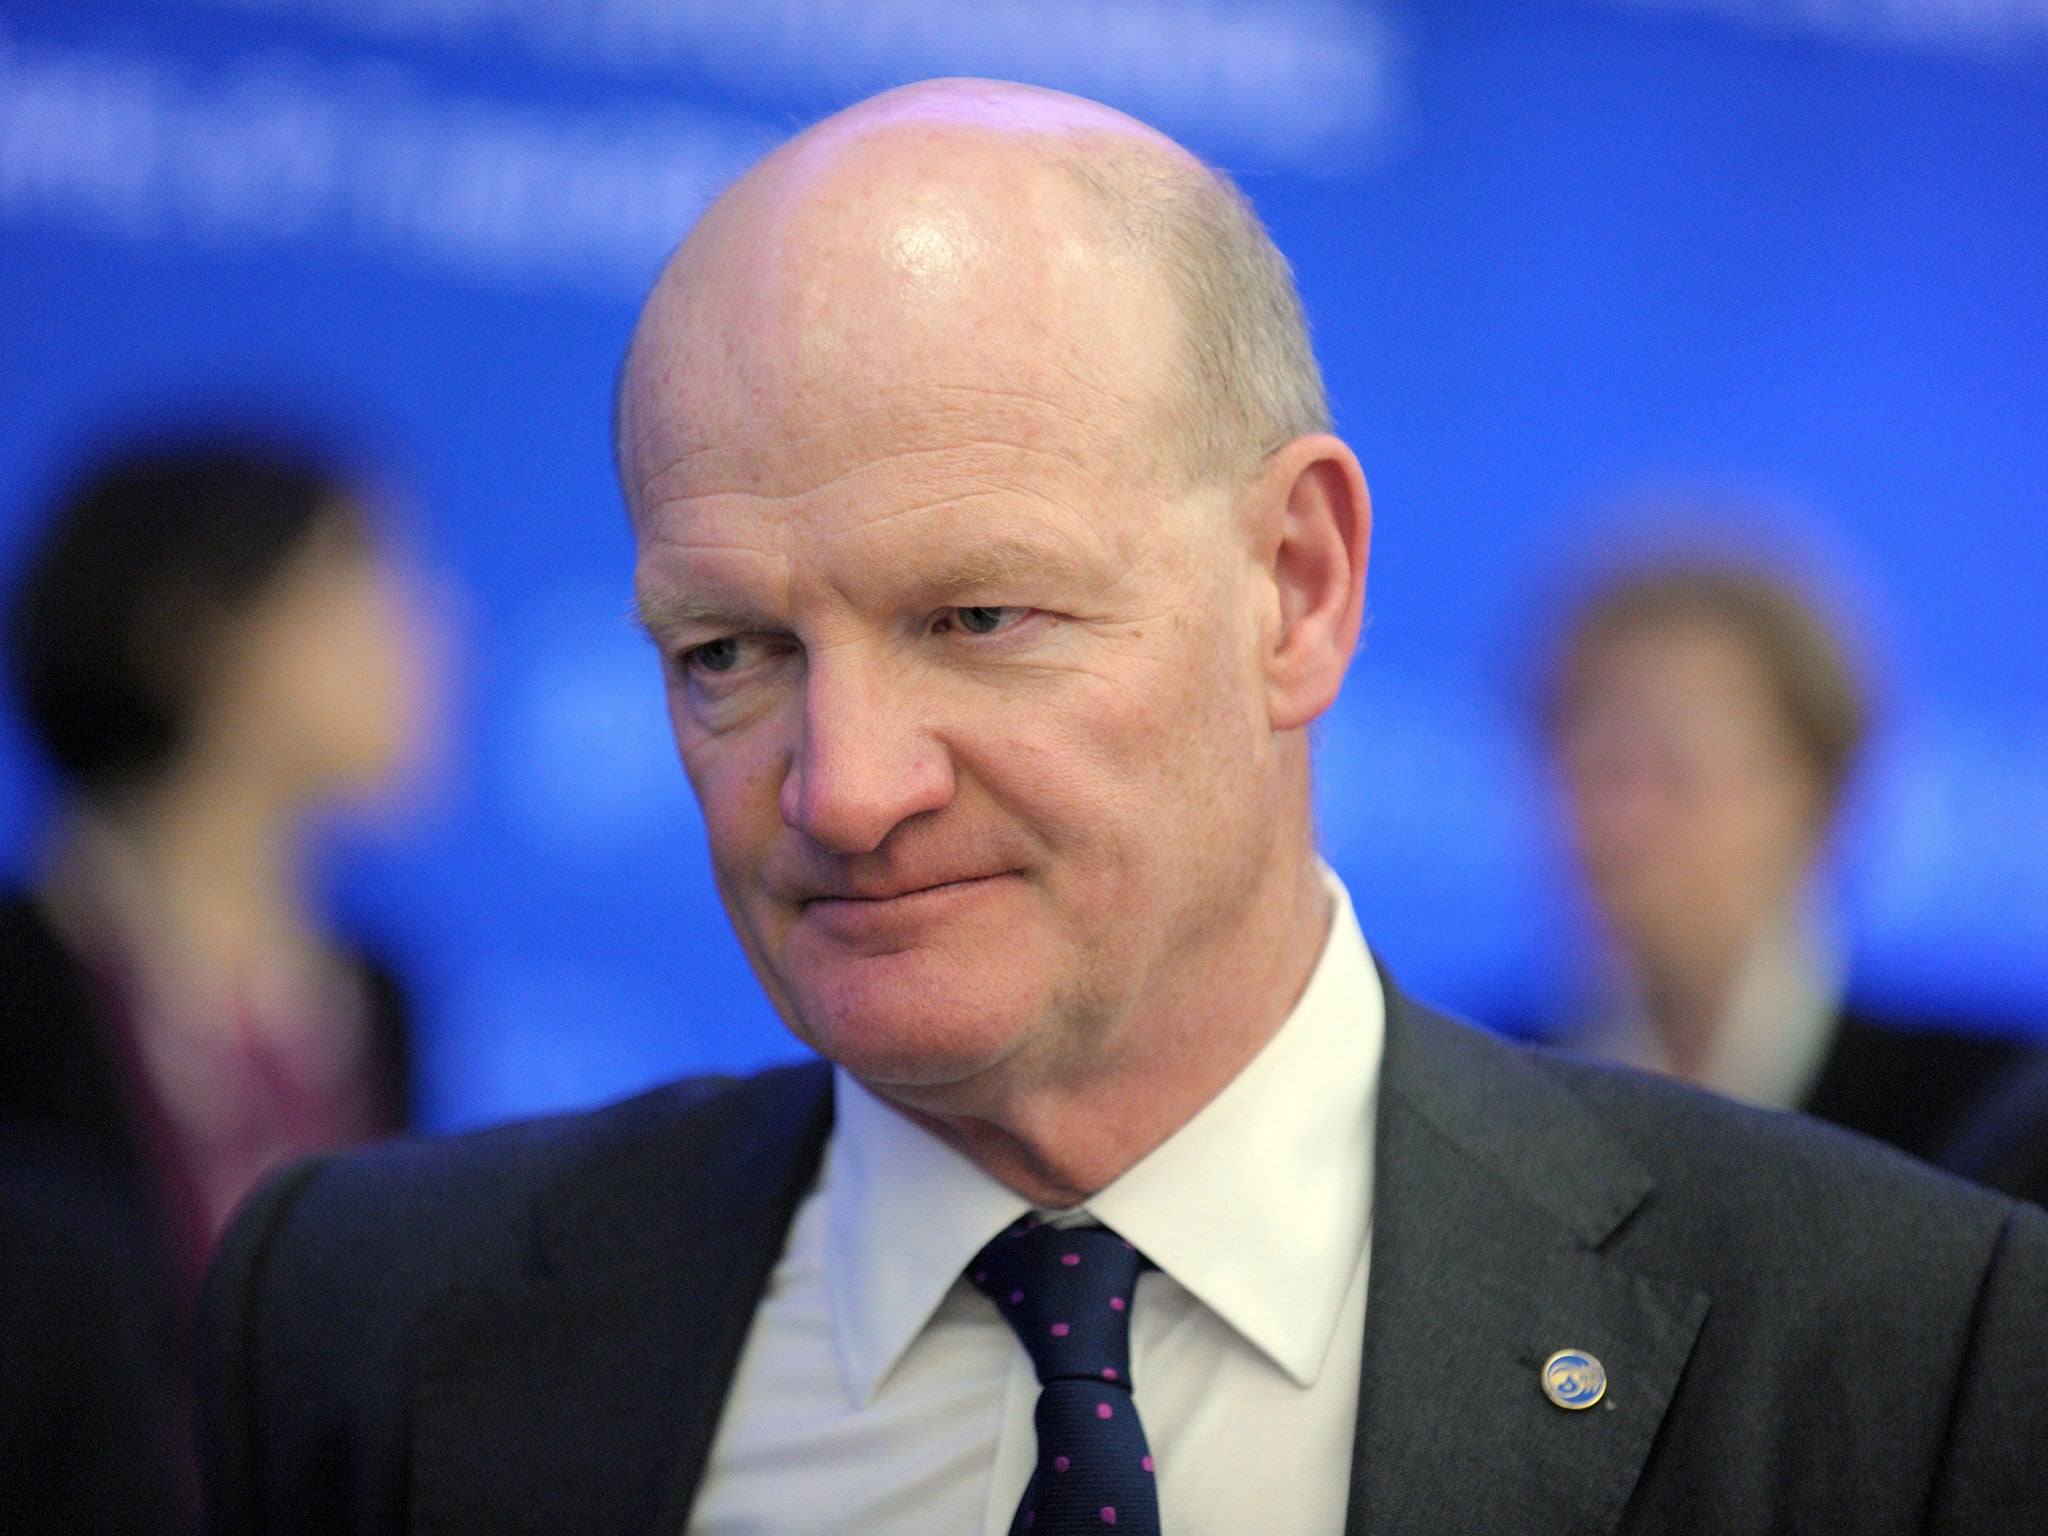 Former universities minister David Willetts (Getty Images)